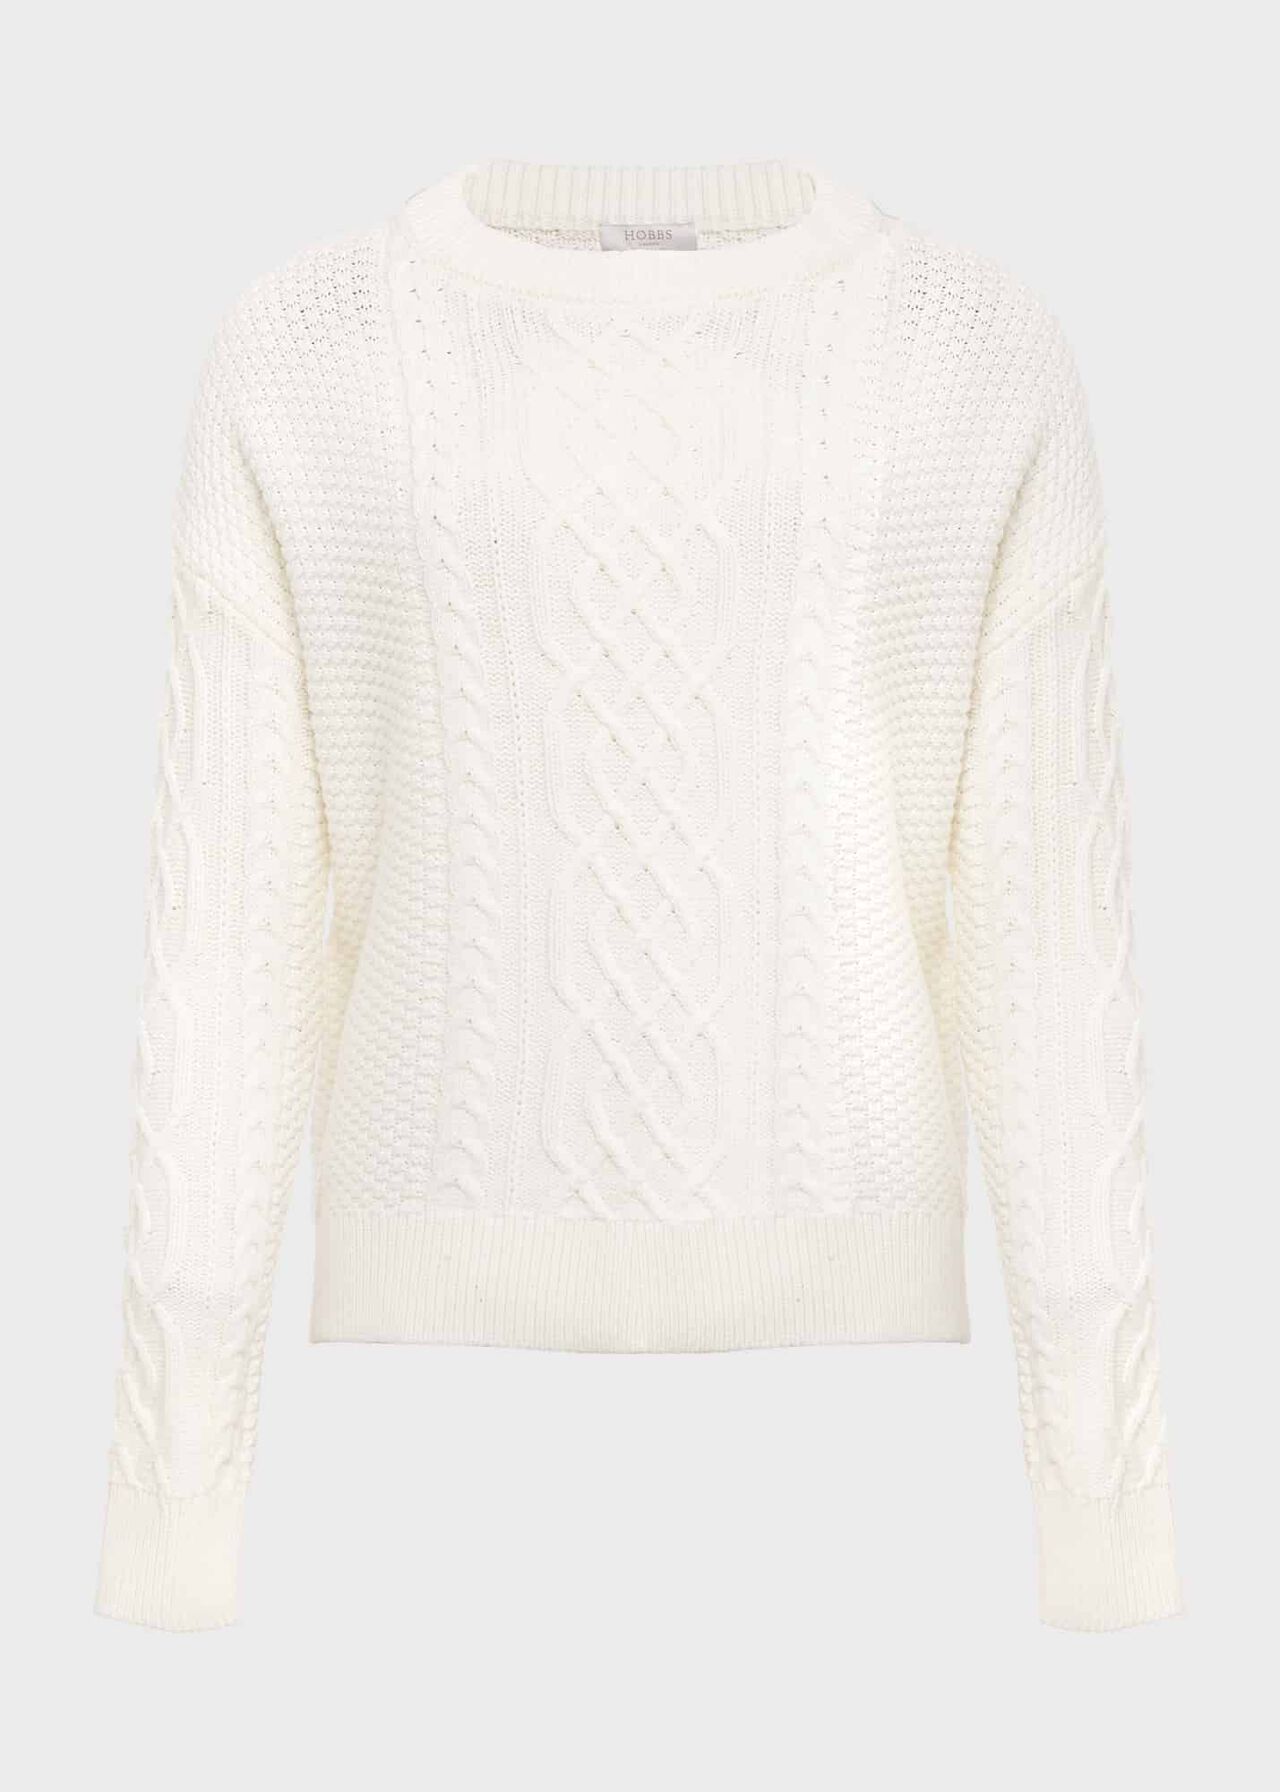 Corina Cotton Cable Sweater, Ivory, hi-res